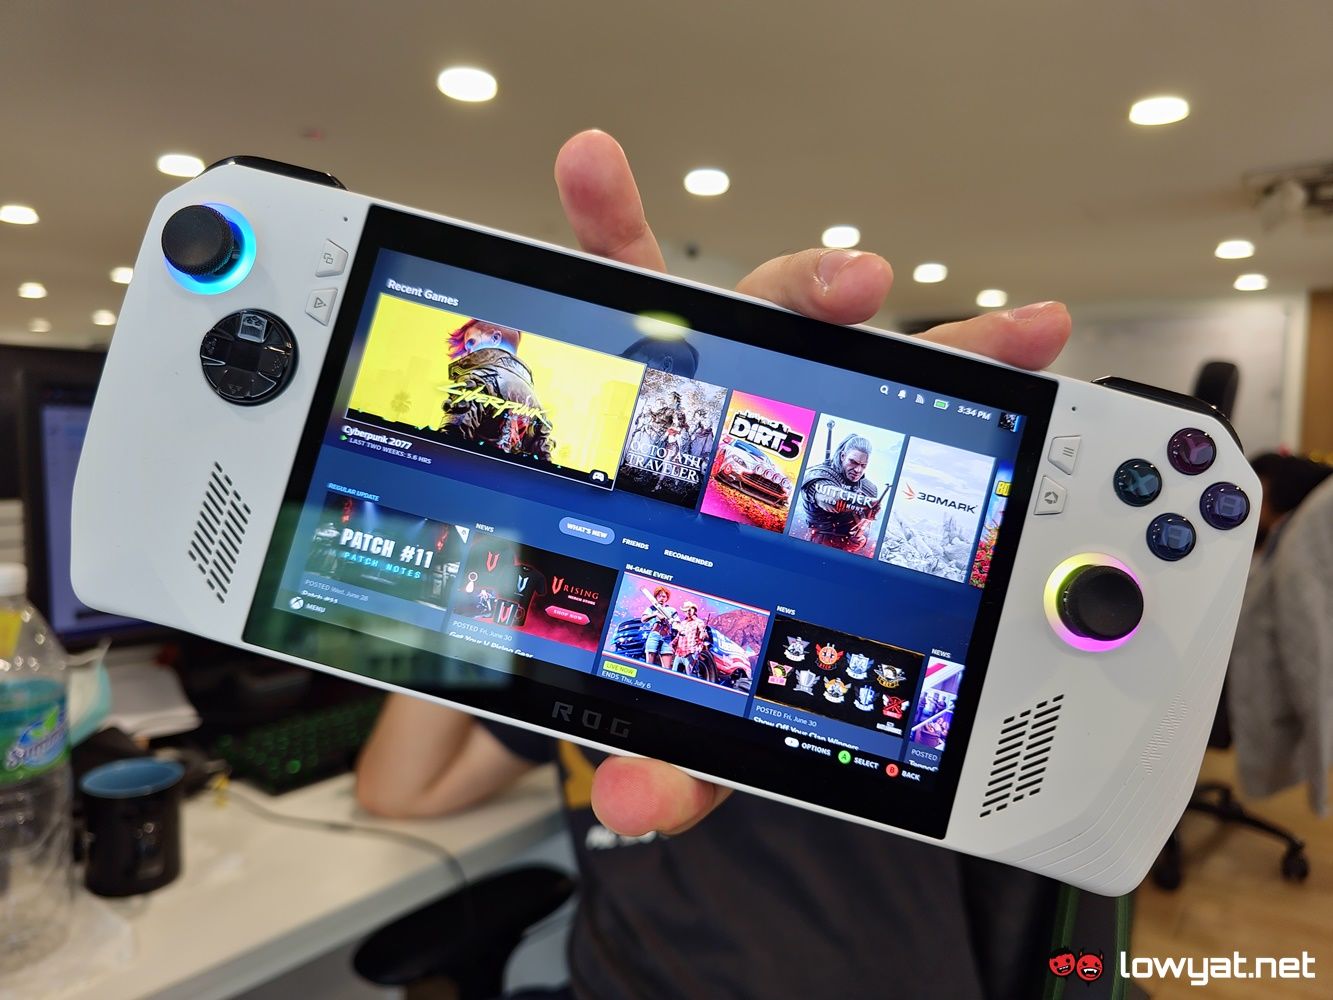 ASUS ROG Ally Review: Decent First Attempt At Handheld Gaming